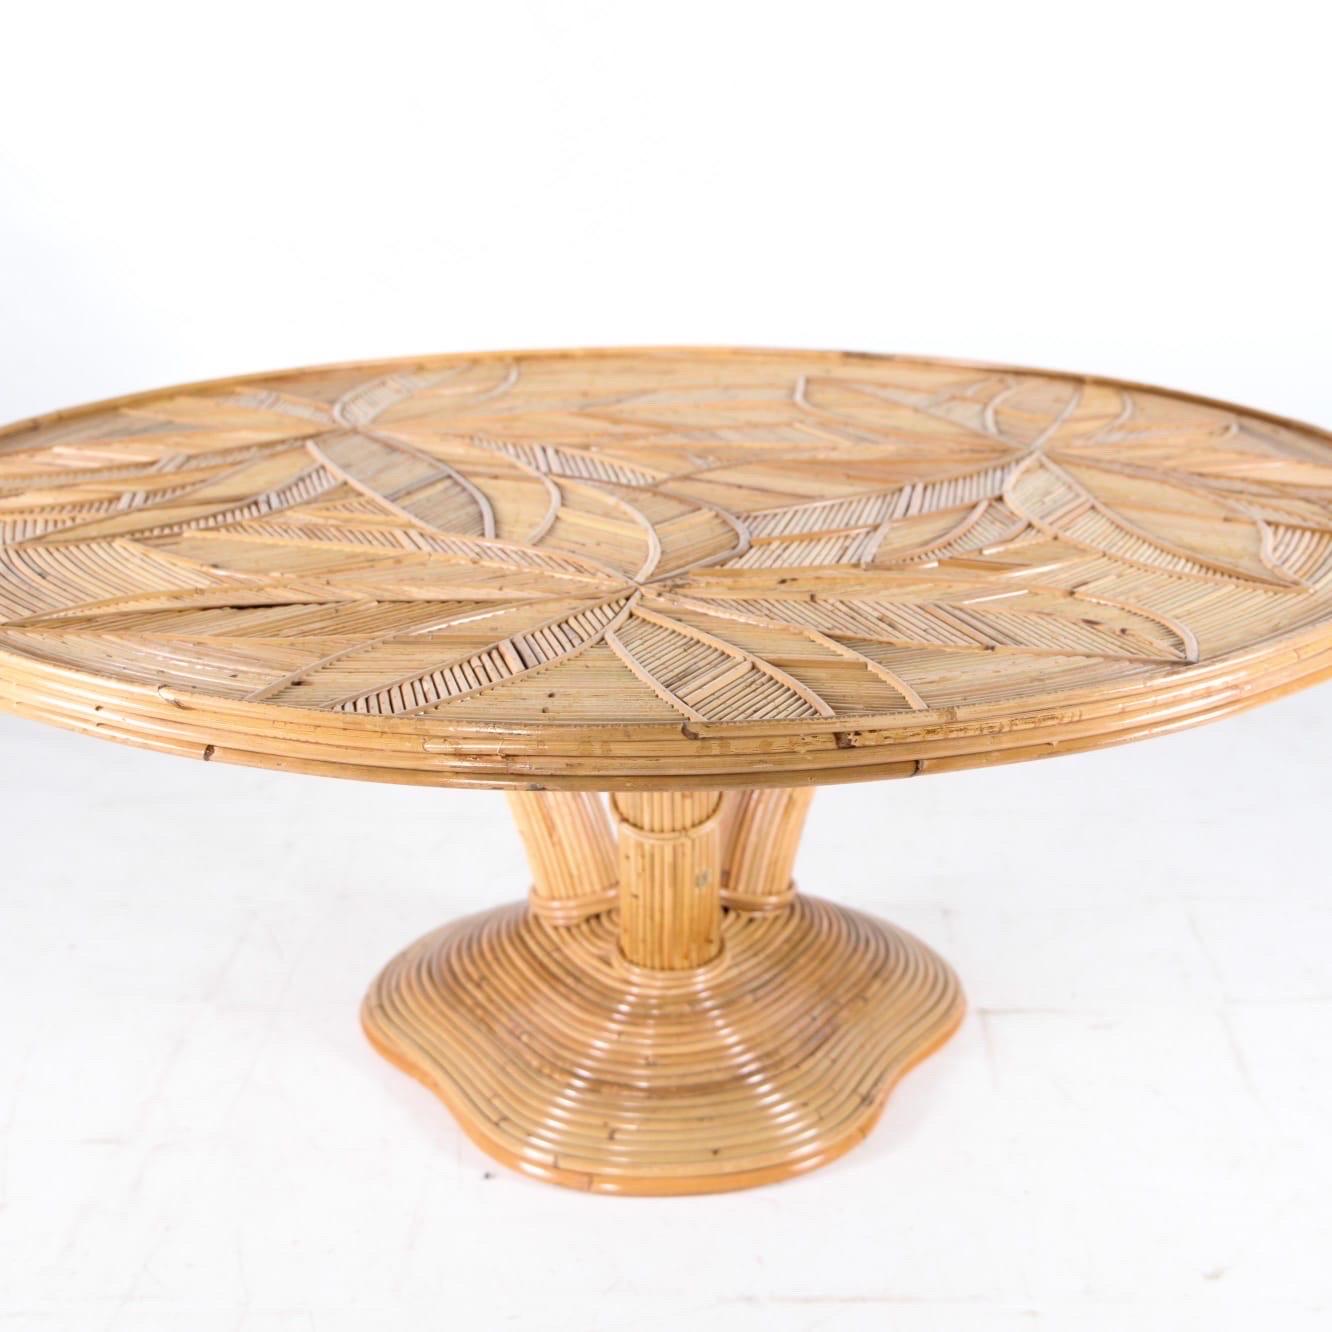 Incredible rattan round coffee table with « palmtrees » patterns.
Three legs representing a palmtree and top with palms patterns covered by a glass top.
Beautiful patina, excellent condition. 